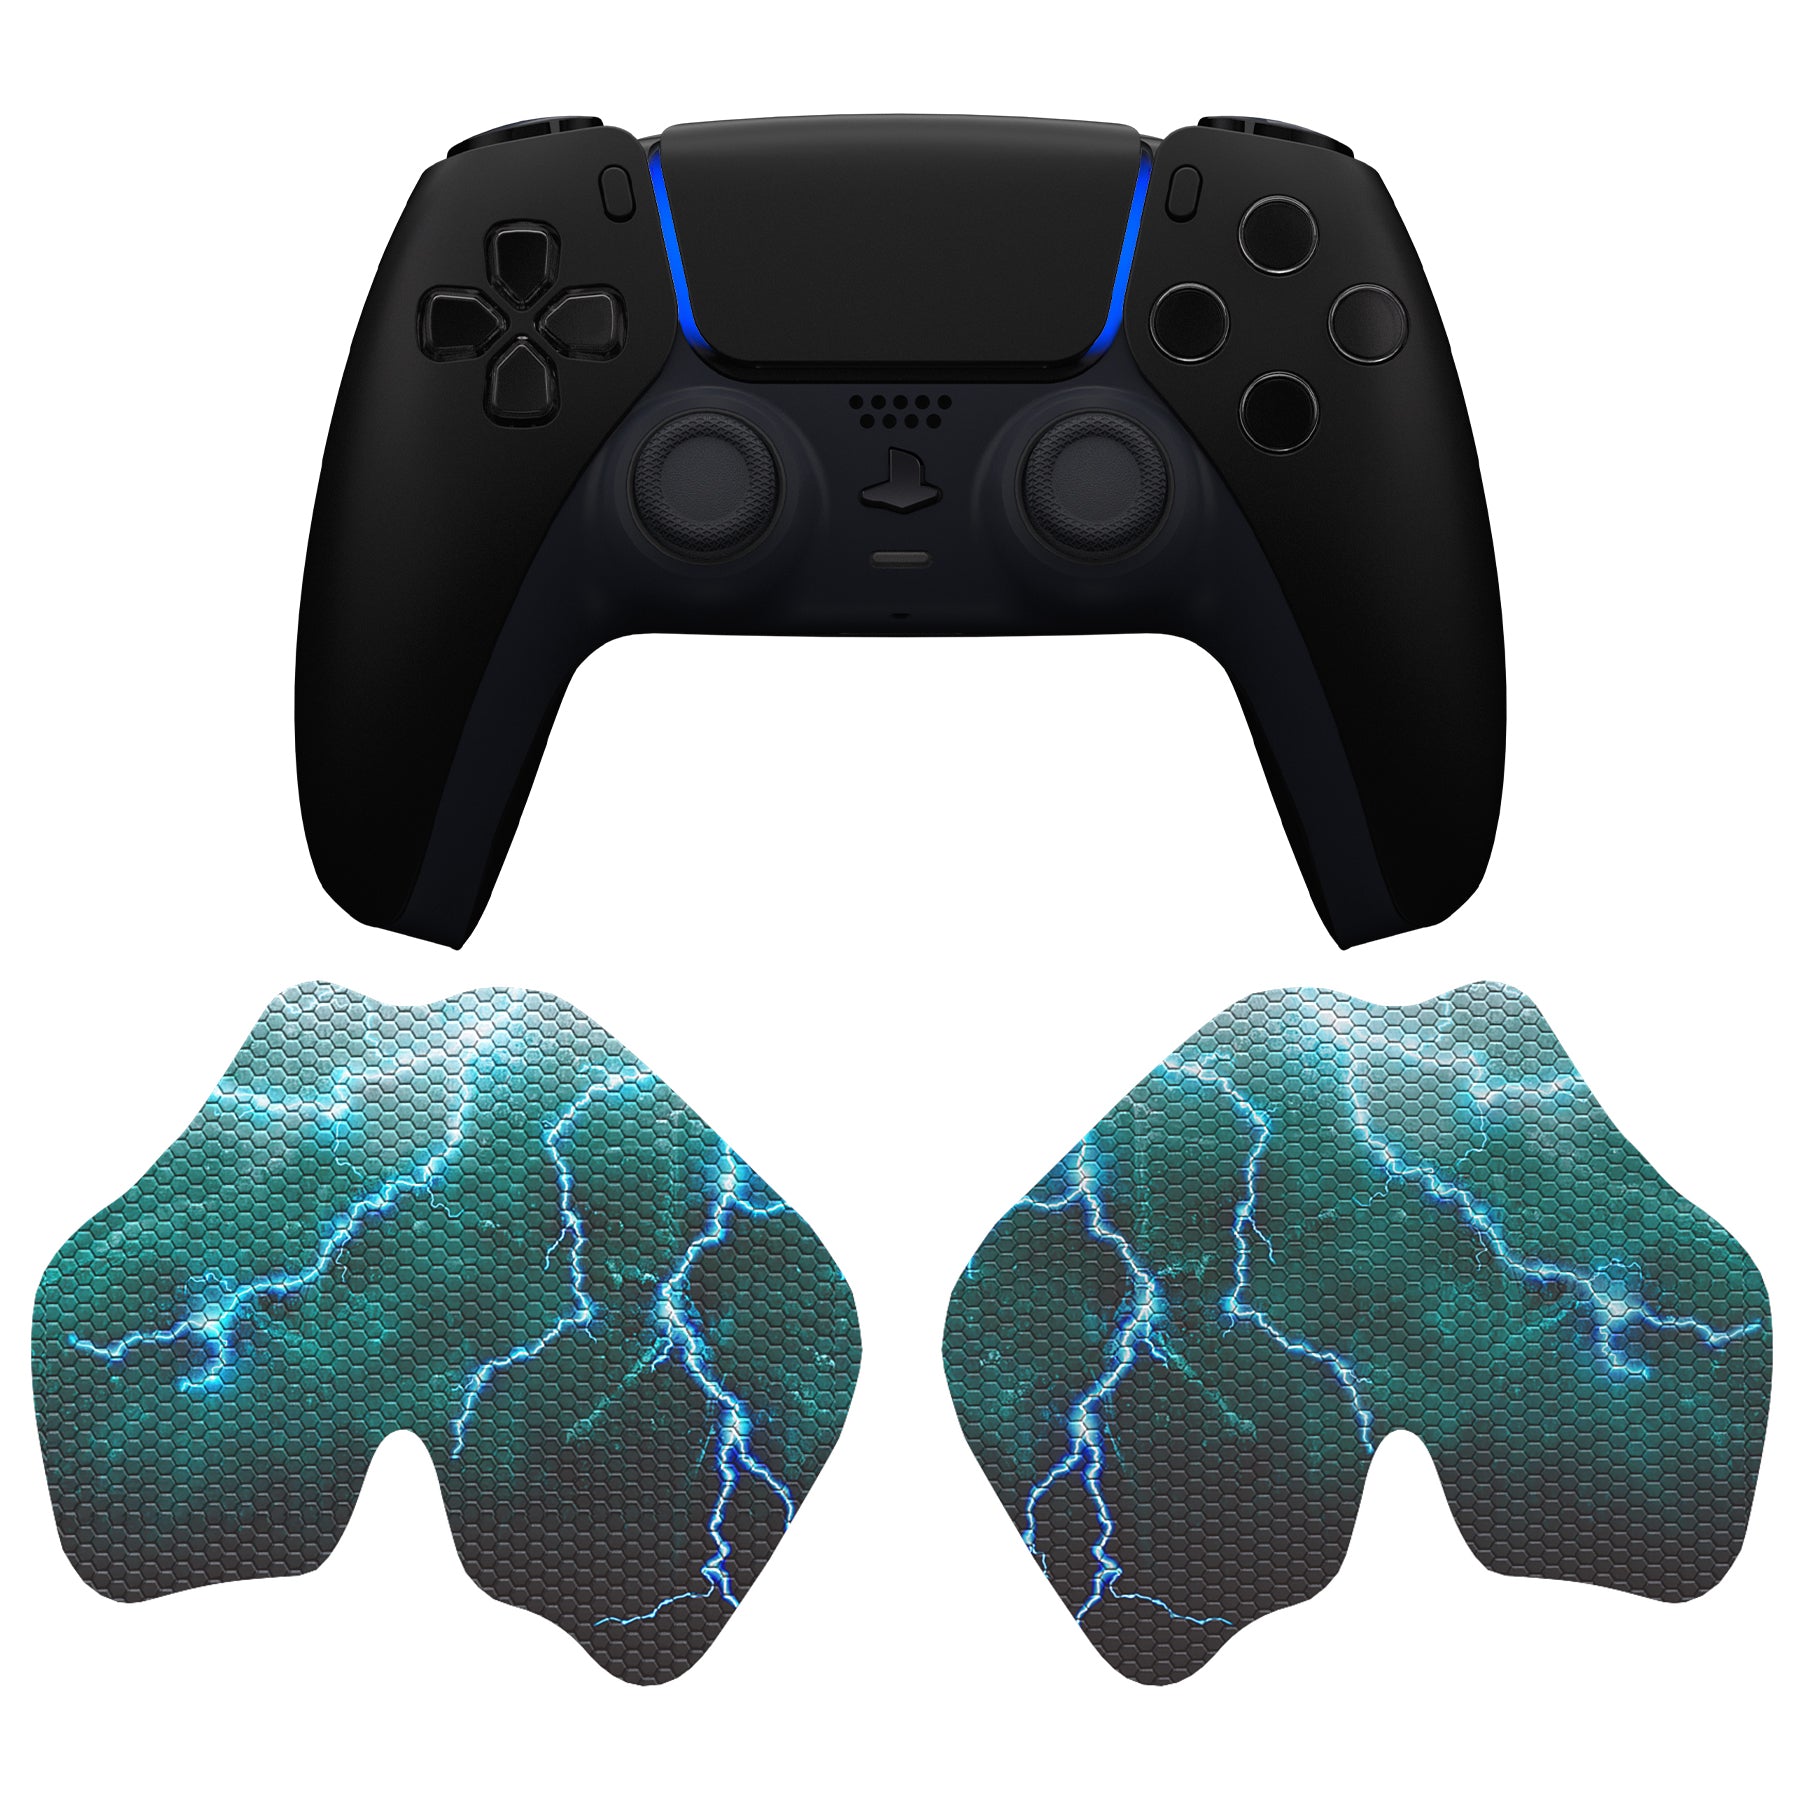 PlayVital Green Storm Thunder Anti-Skid Sweat-Absorbent Controller Grip for PS5 Controller, Professional Textured Soft Rubber Pads Handle Grips for PS5 Controller - PFPJ128 PlayVital